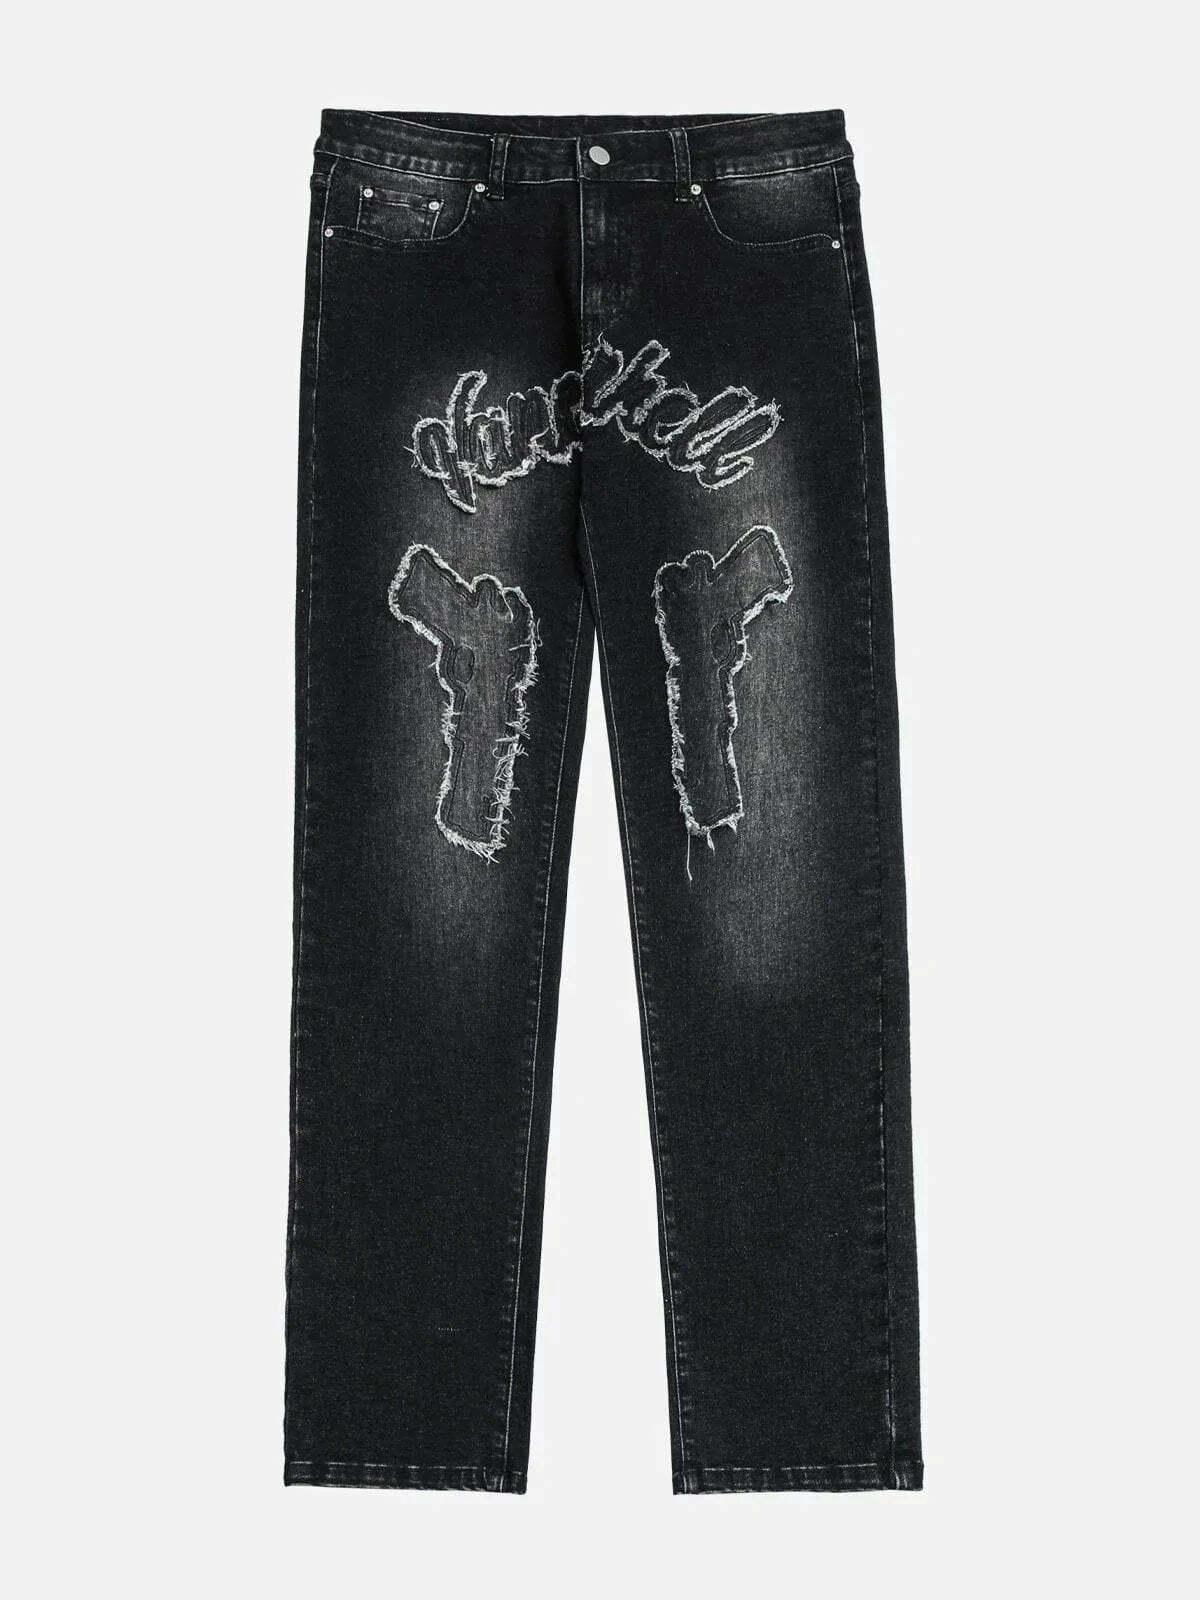 revolutionary waterwashed jeans edgy & urban style 3926